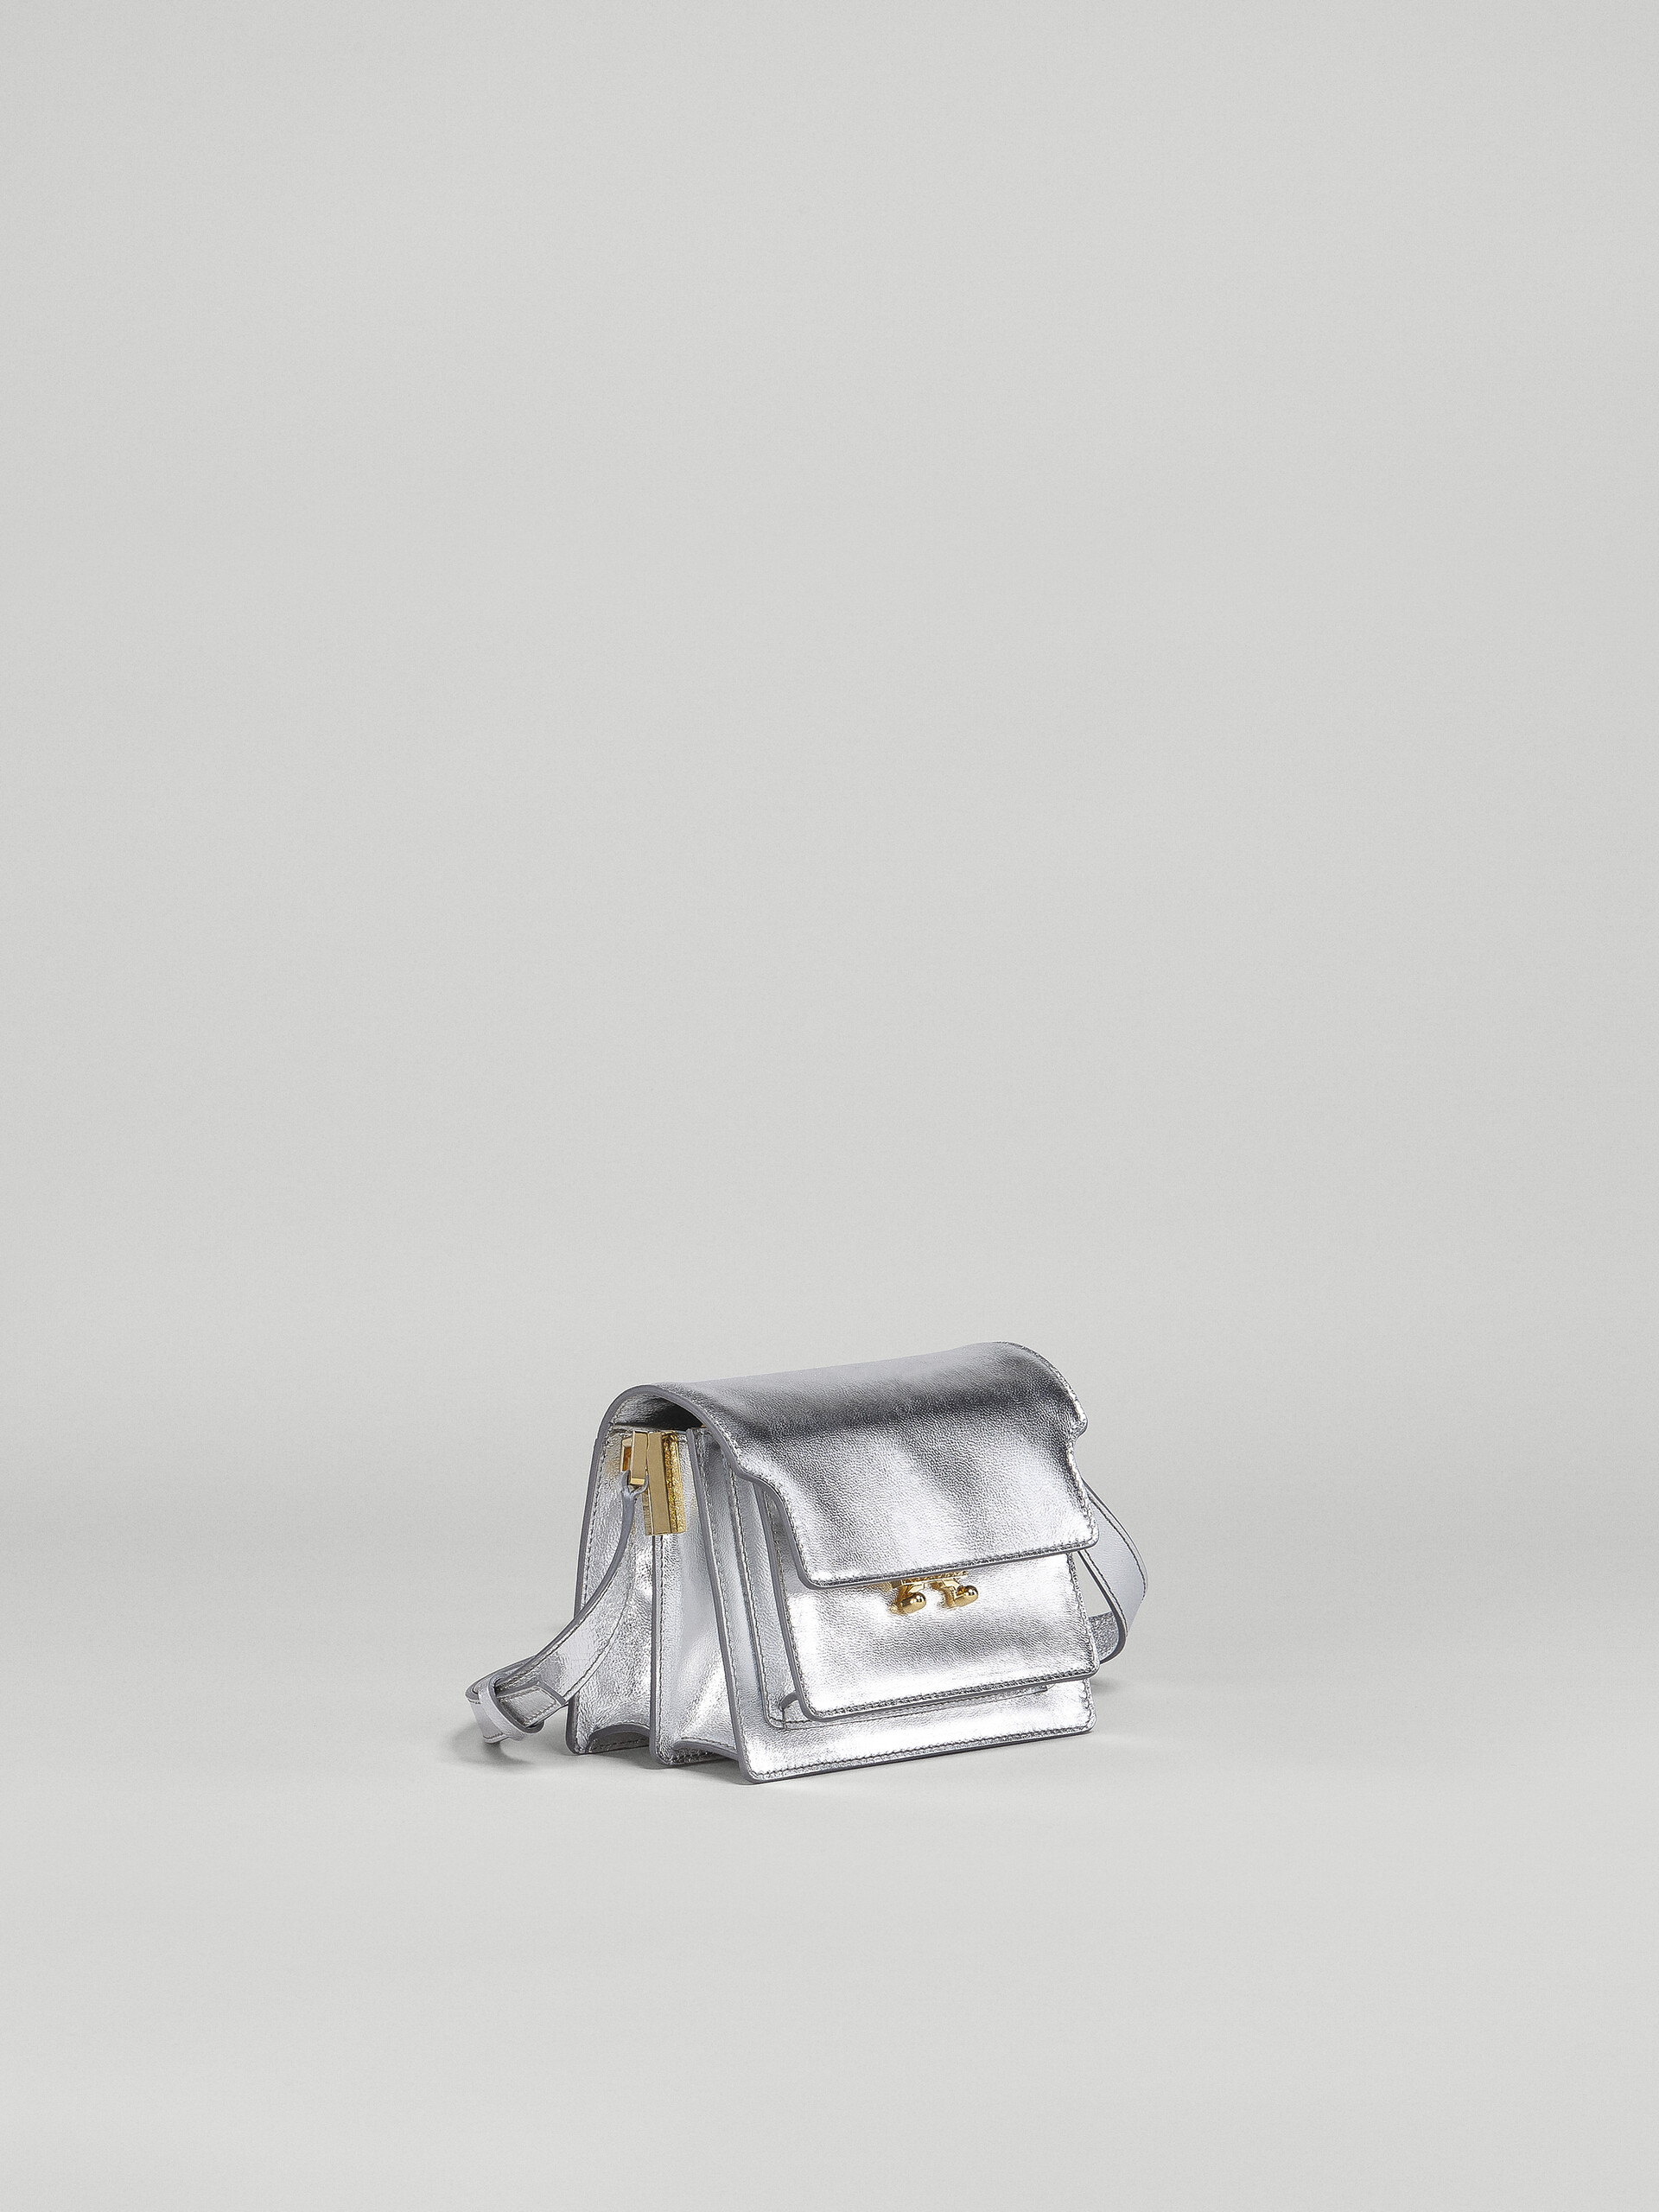 TRUNK SOFT mini bag in silver metallic leather - Shoulder Bags - Image 5